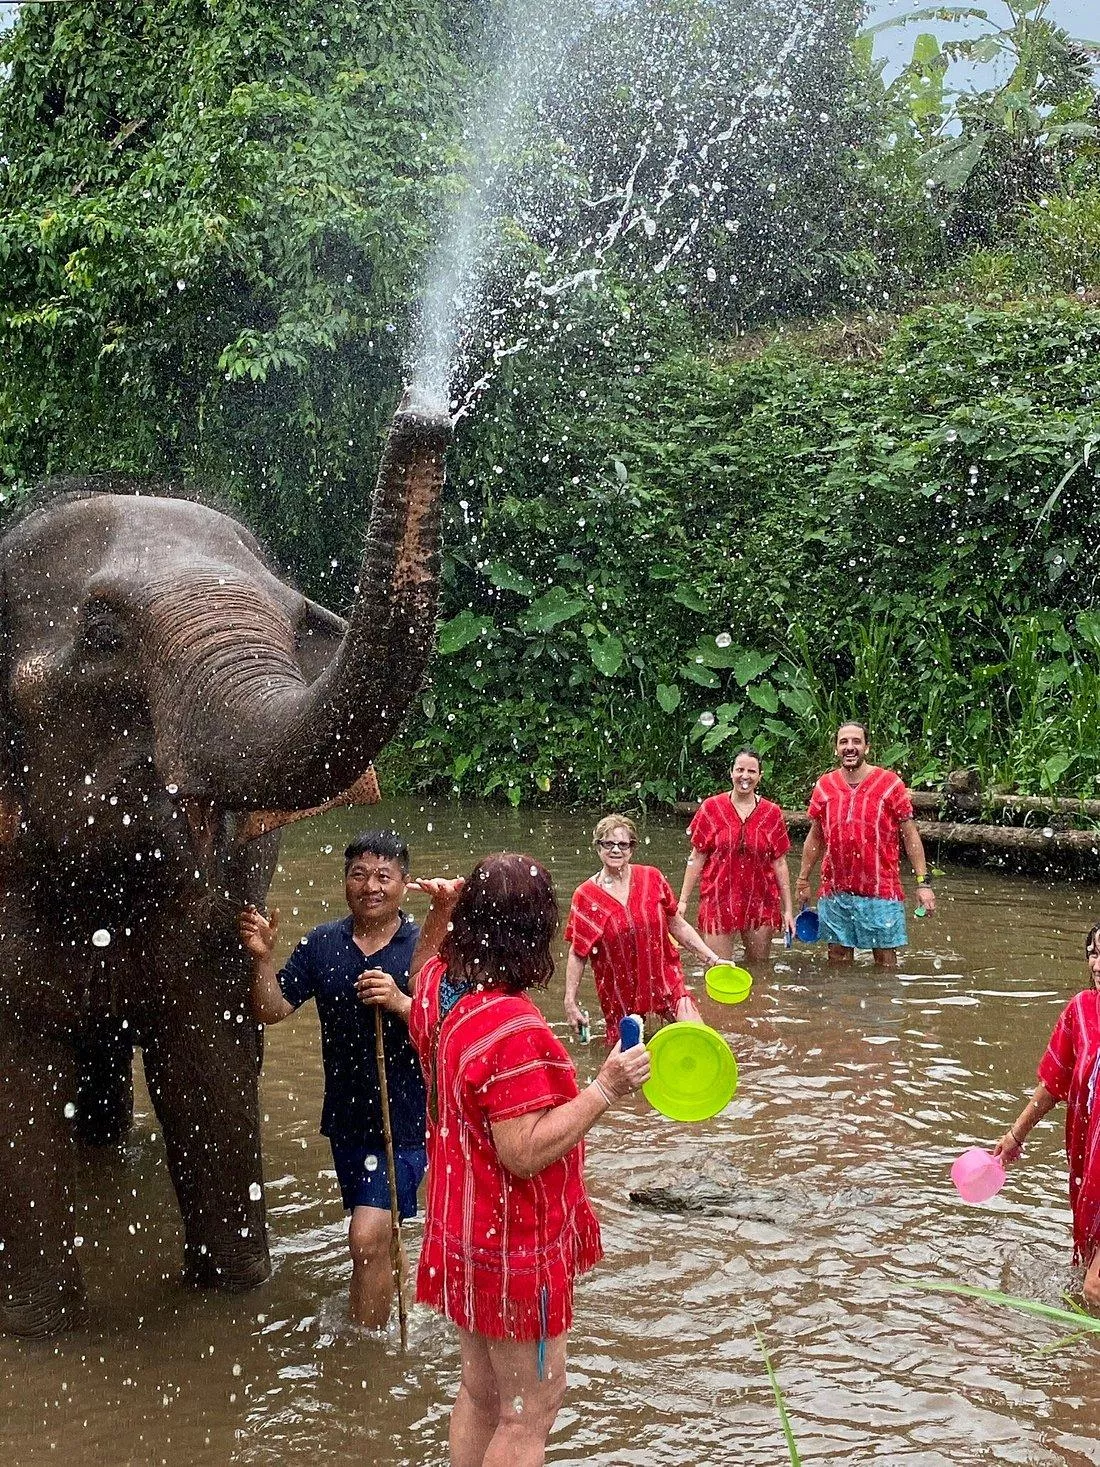 Picture of people watching an elephant splashing water, during their elephant tour.